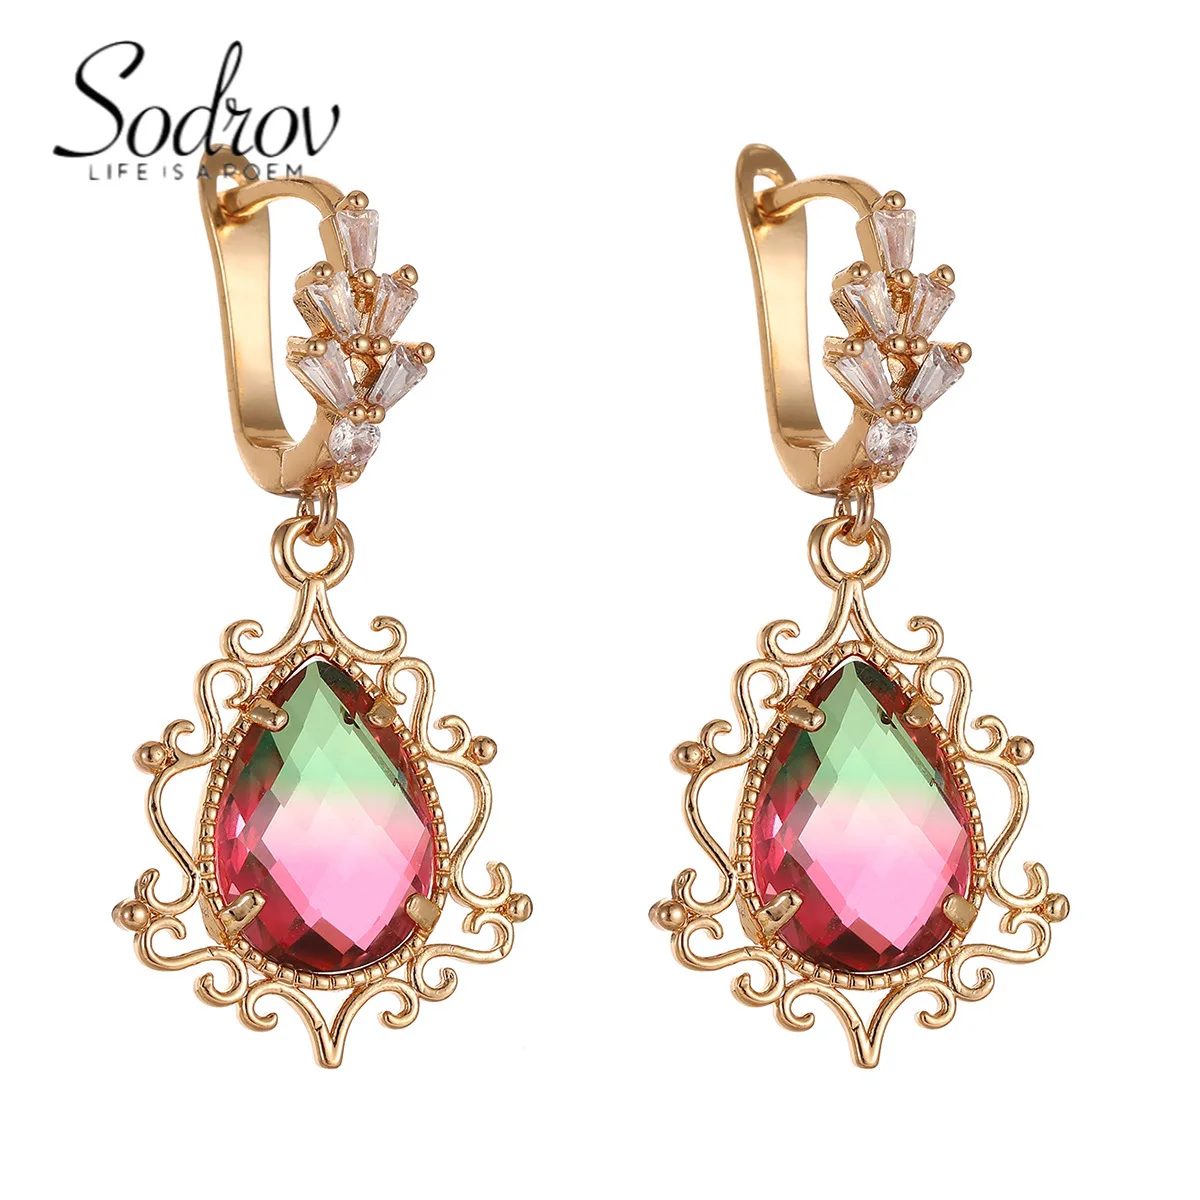 

SODROV Gold Plated Korean Trend Colored Zircon Jewelry Drop Earrings for Women Engagement Wedding Gift